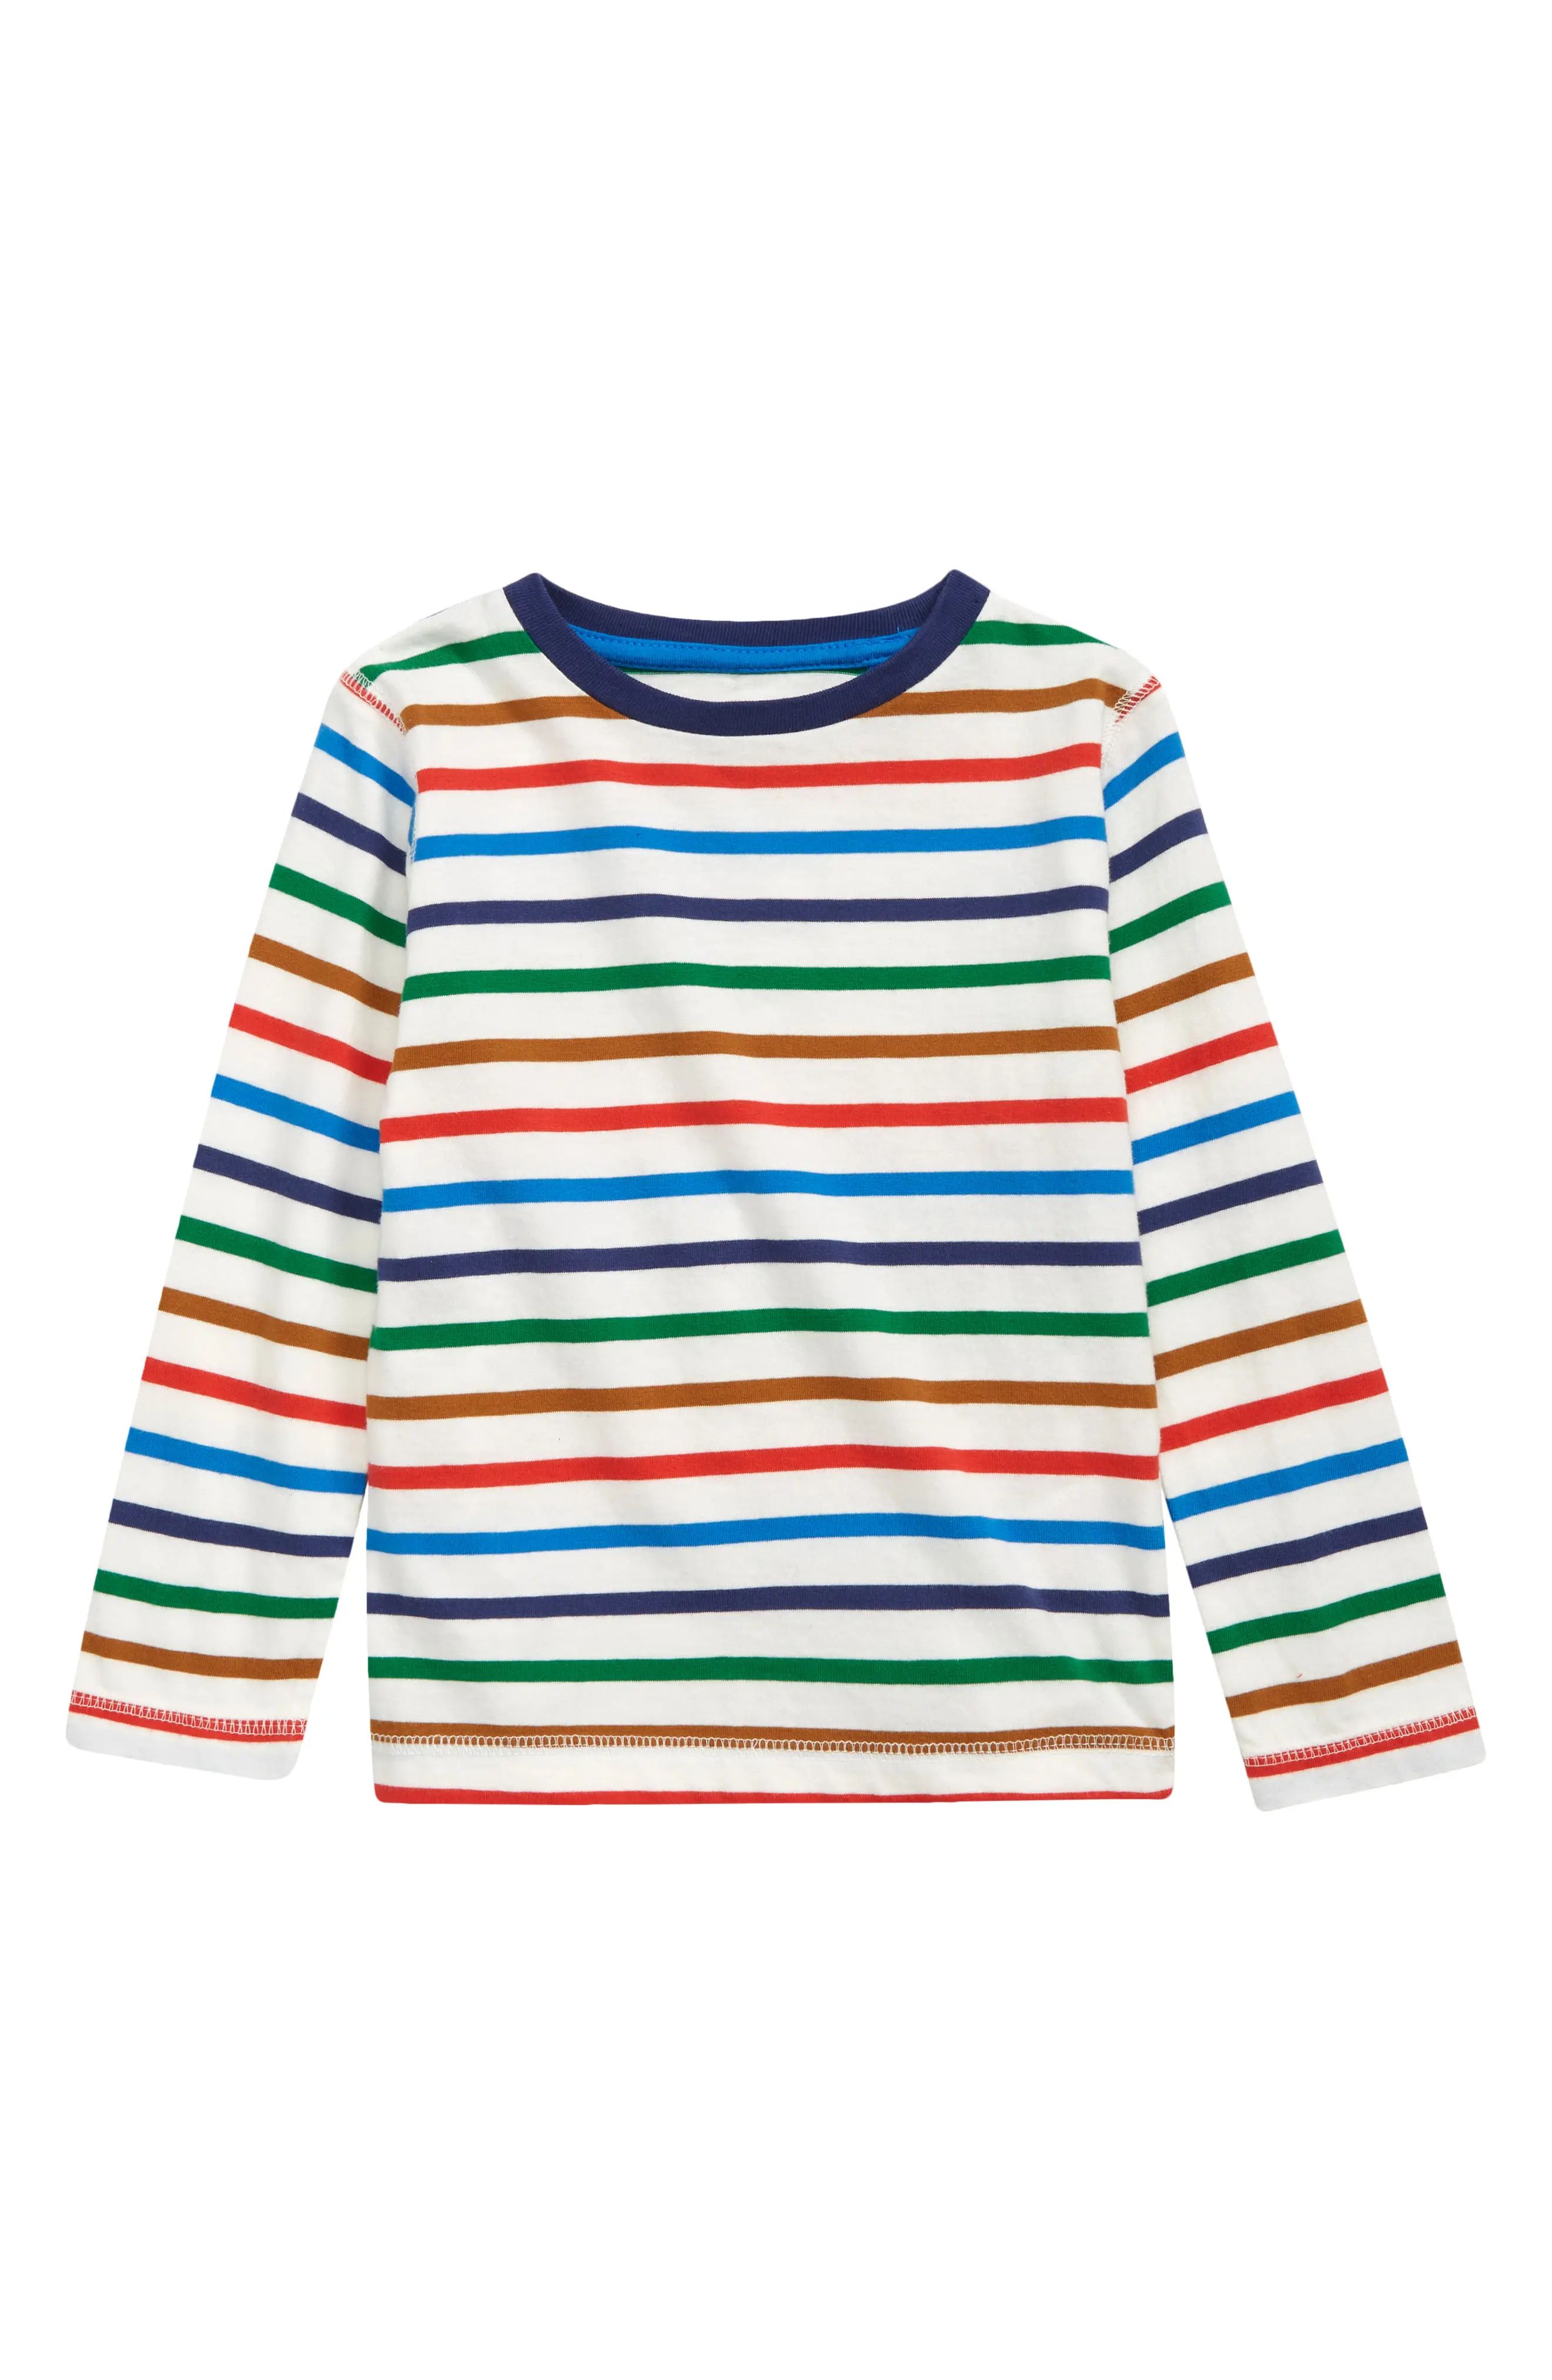 Mini Boden Kids' Supersoft Long Sleeve T-Shirt, Size 4-5Y in Ivory/Rainbow at Nordstrom | Nordstrom